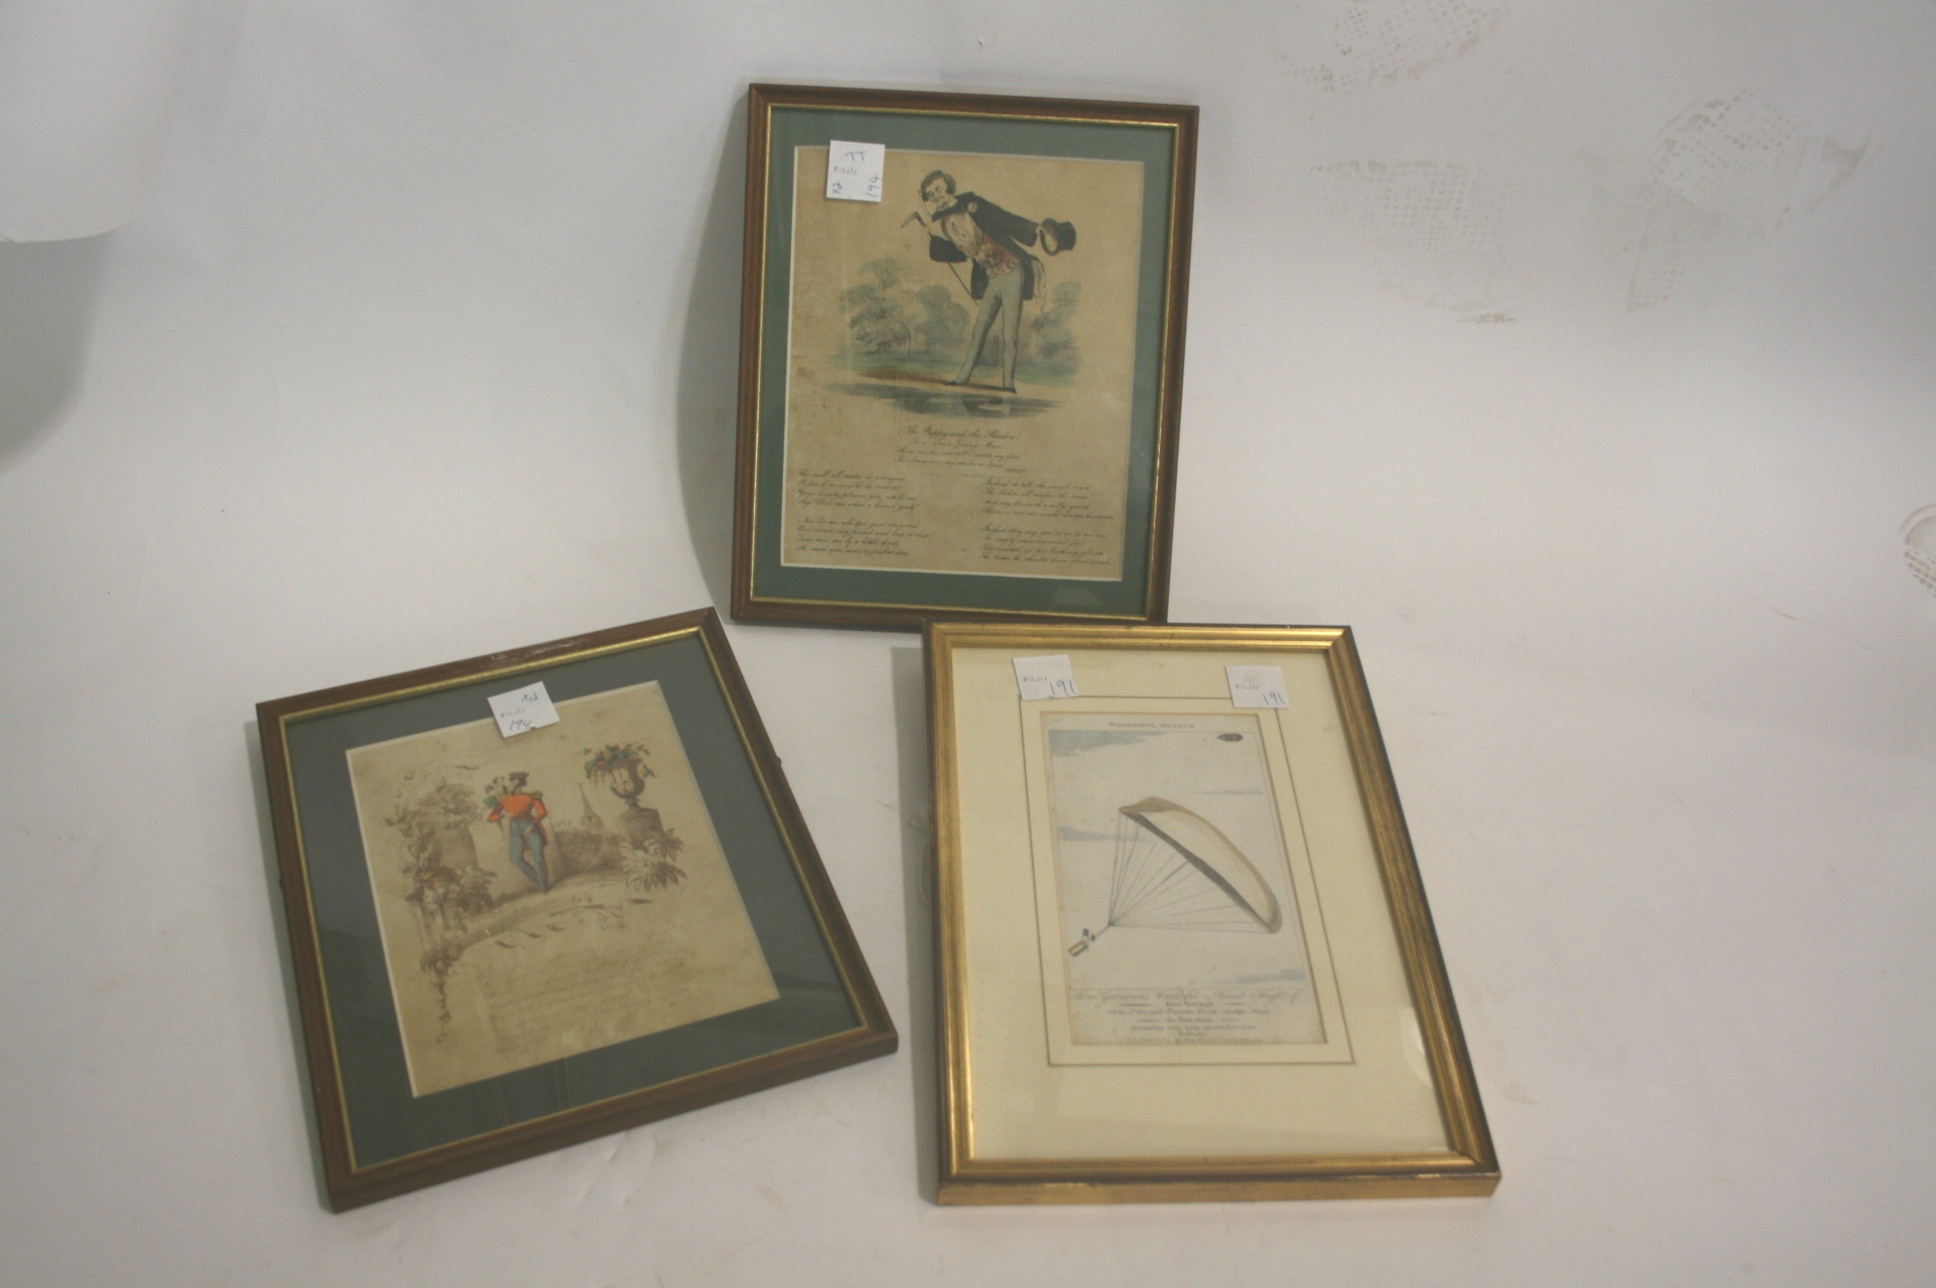 EARLY PARACHUTE PRINT titled Wonderful Museum and dating to 1803, published by Alex Hogg. Also